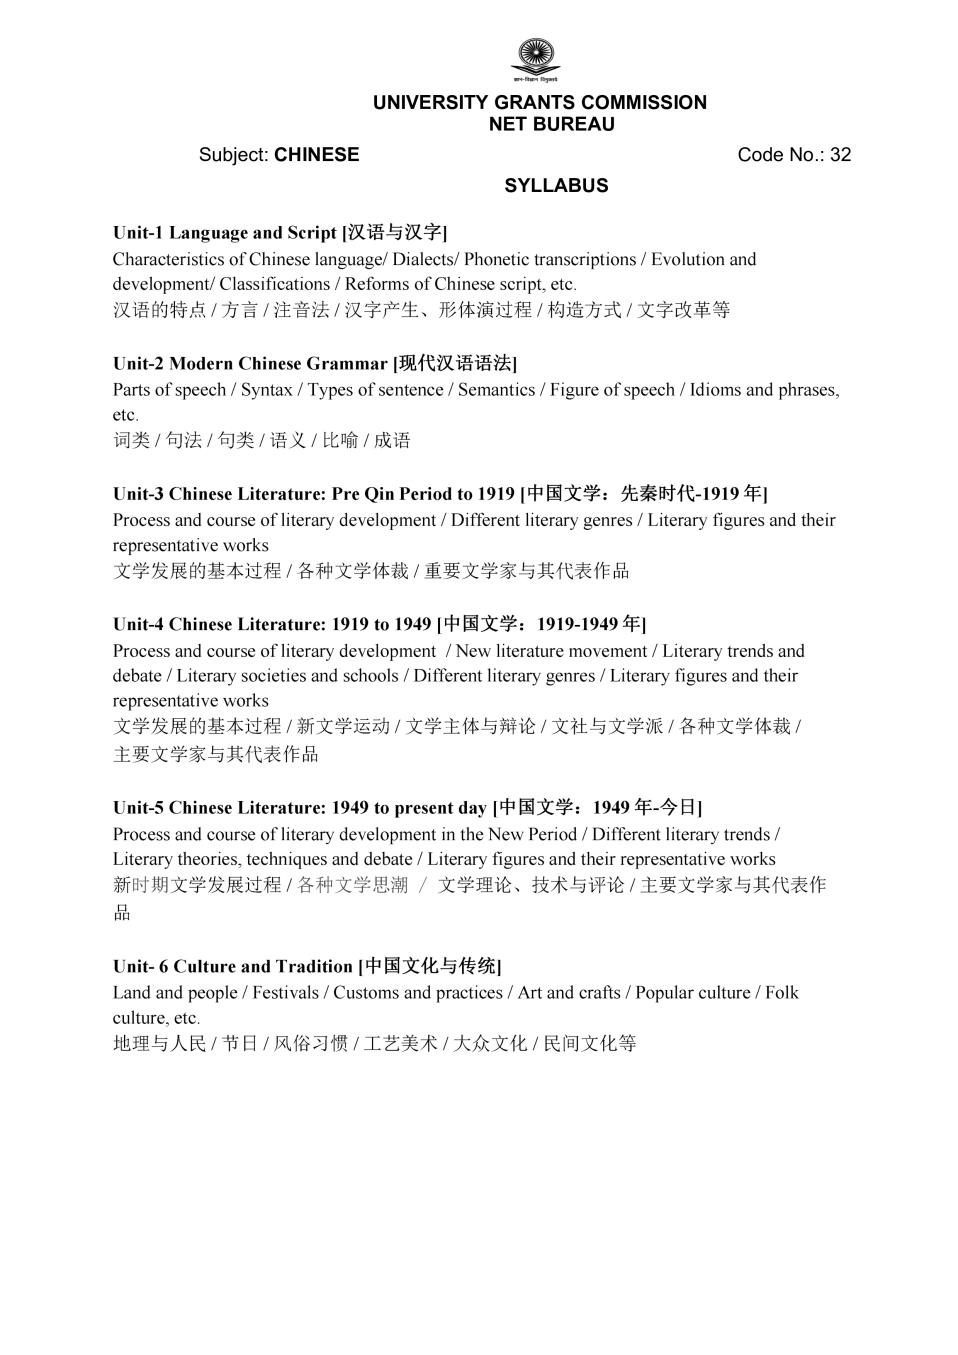 UGC NET Syllabus for Chinese 2020 - Page 1